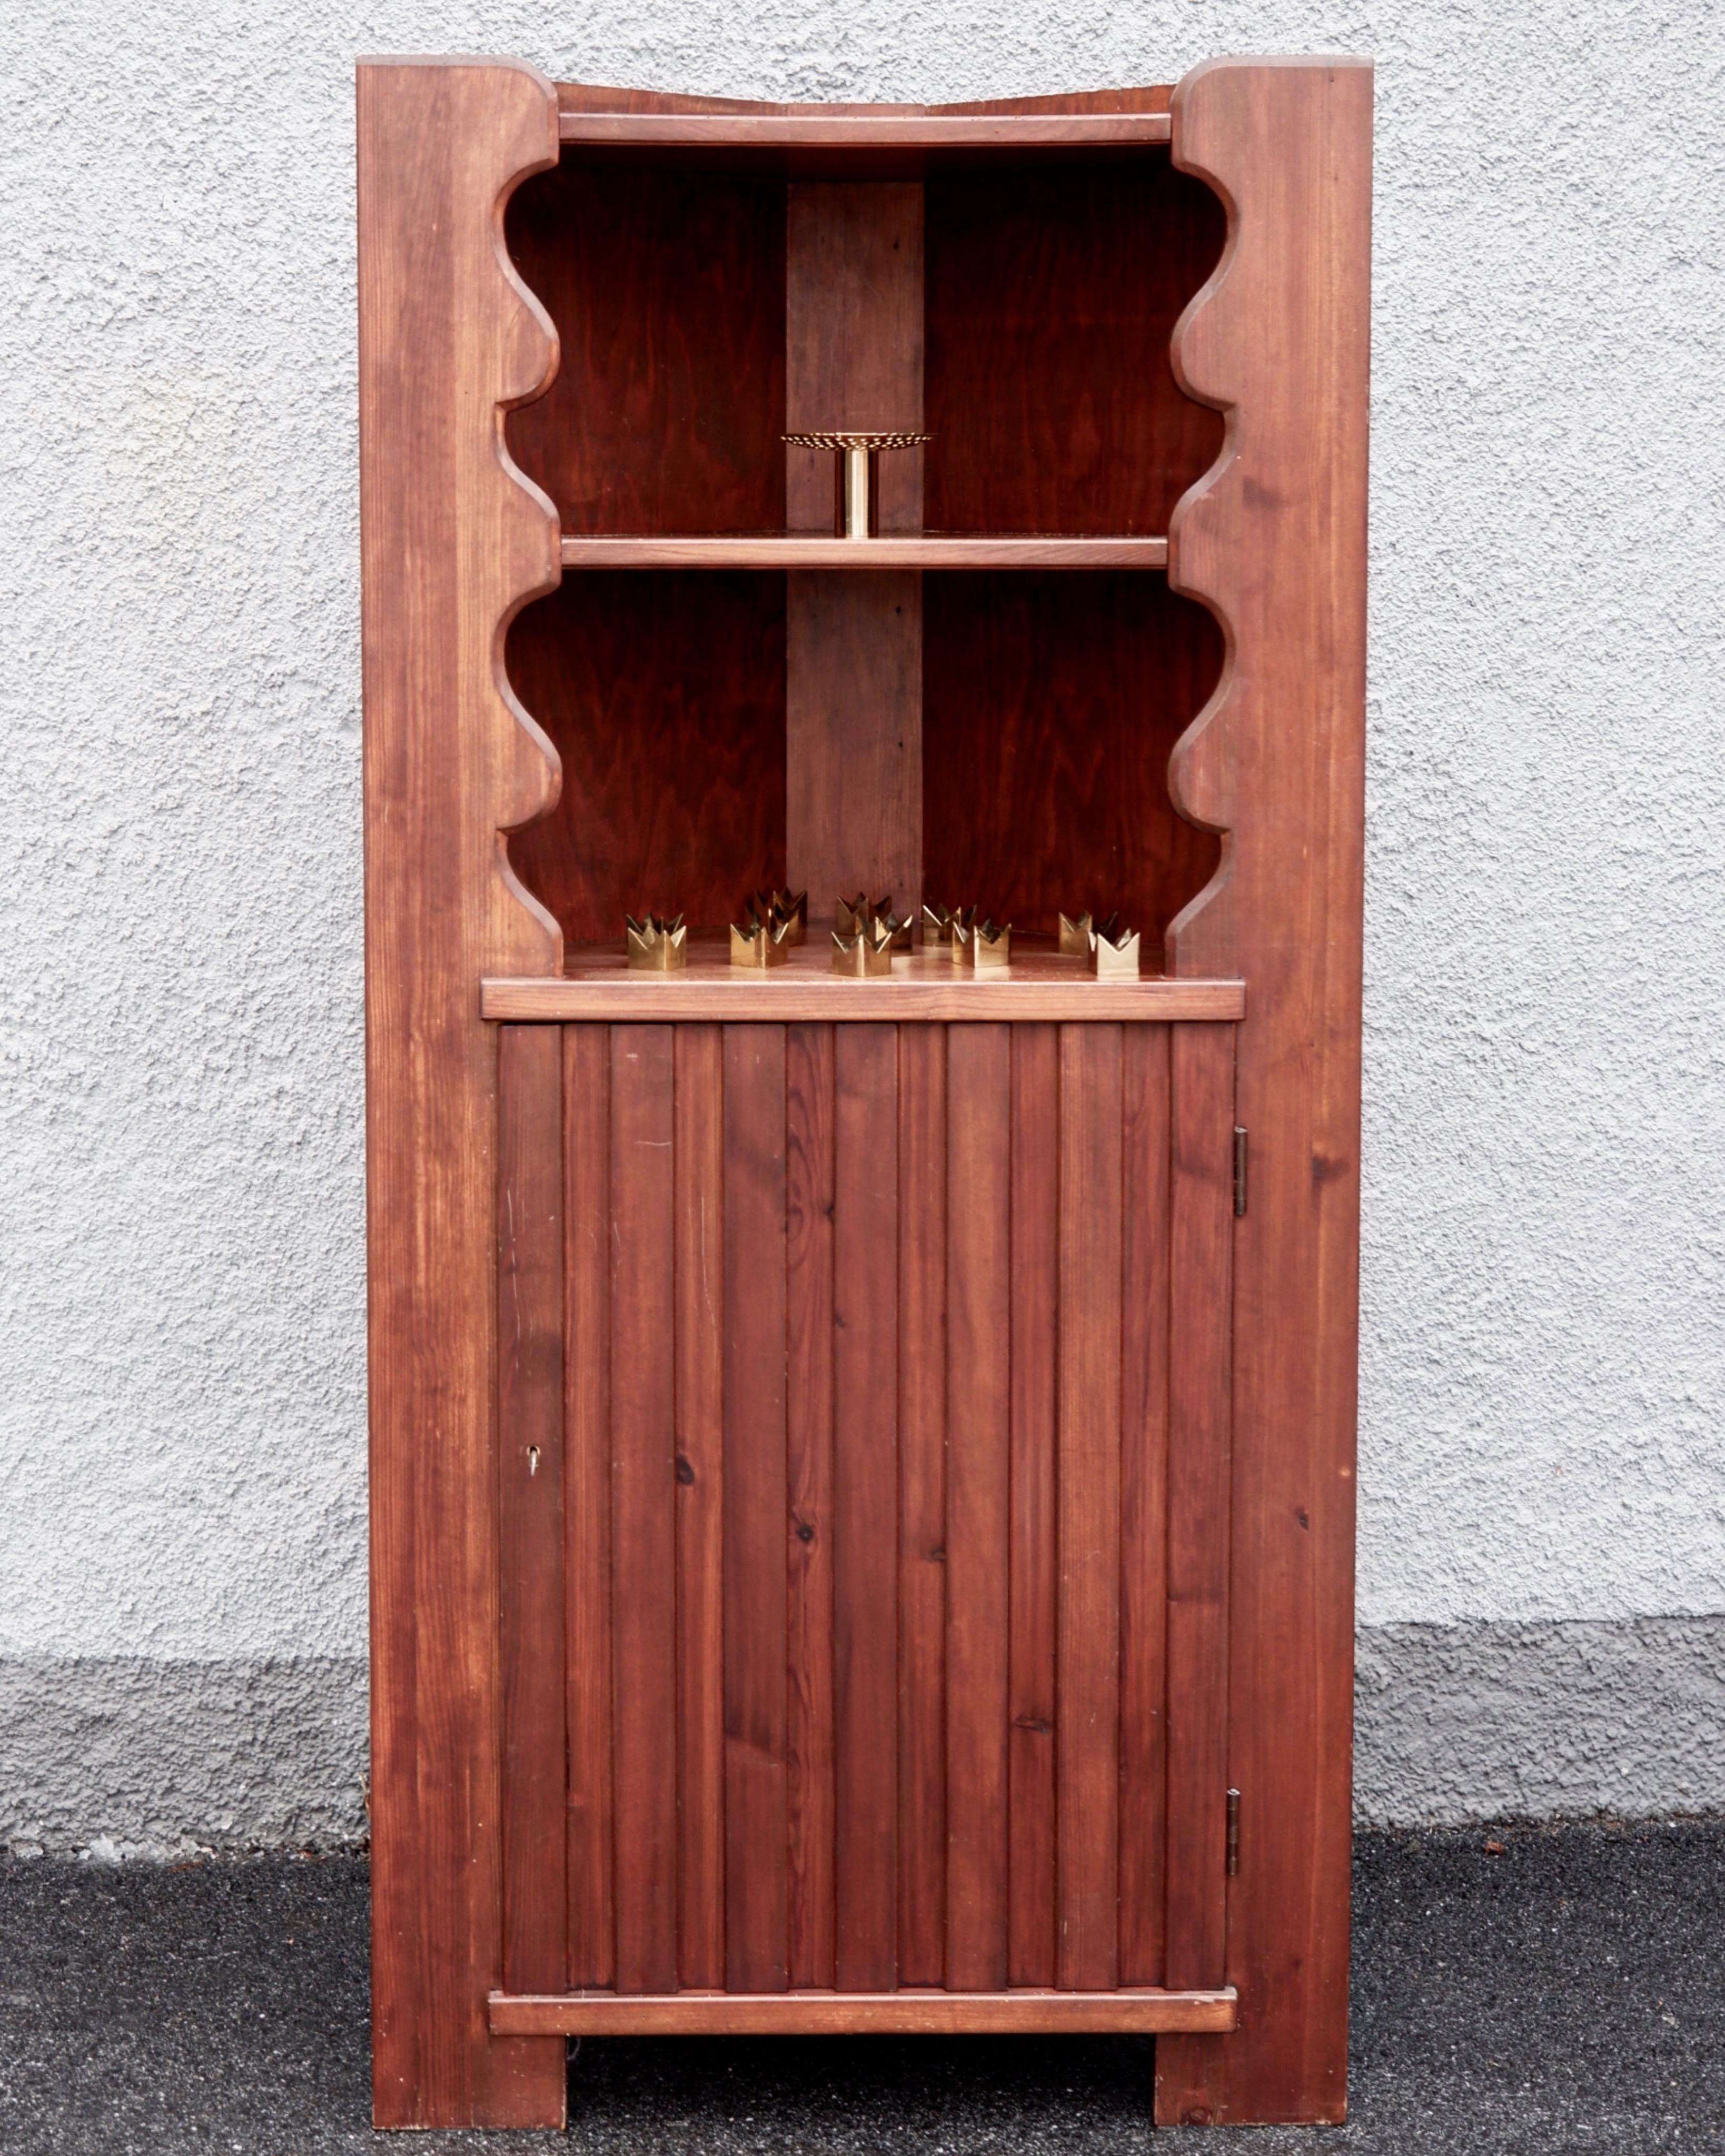 Axel Einar Hjorth pine angle stained cabinet model Utö designed in 1932 and produced by Nordiska Kompaniet in the same time. The cabinet is made in solid pine, has two shelves on the upper part and two other onces in the bottom part. The cabinet can